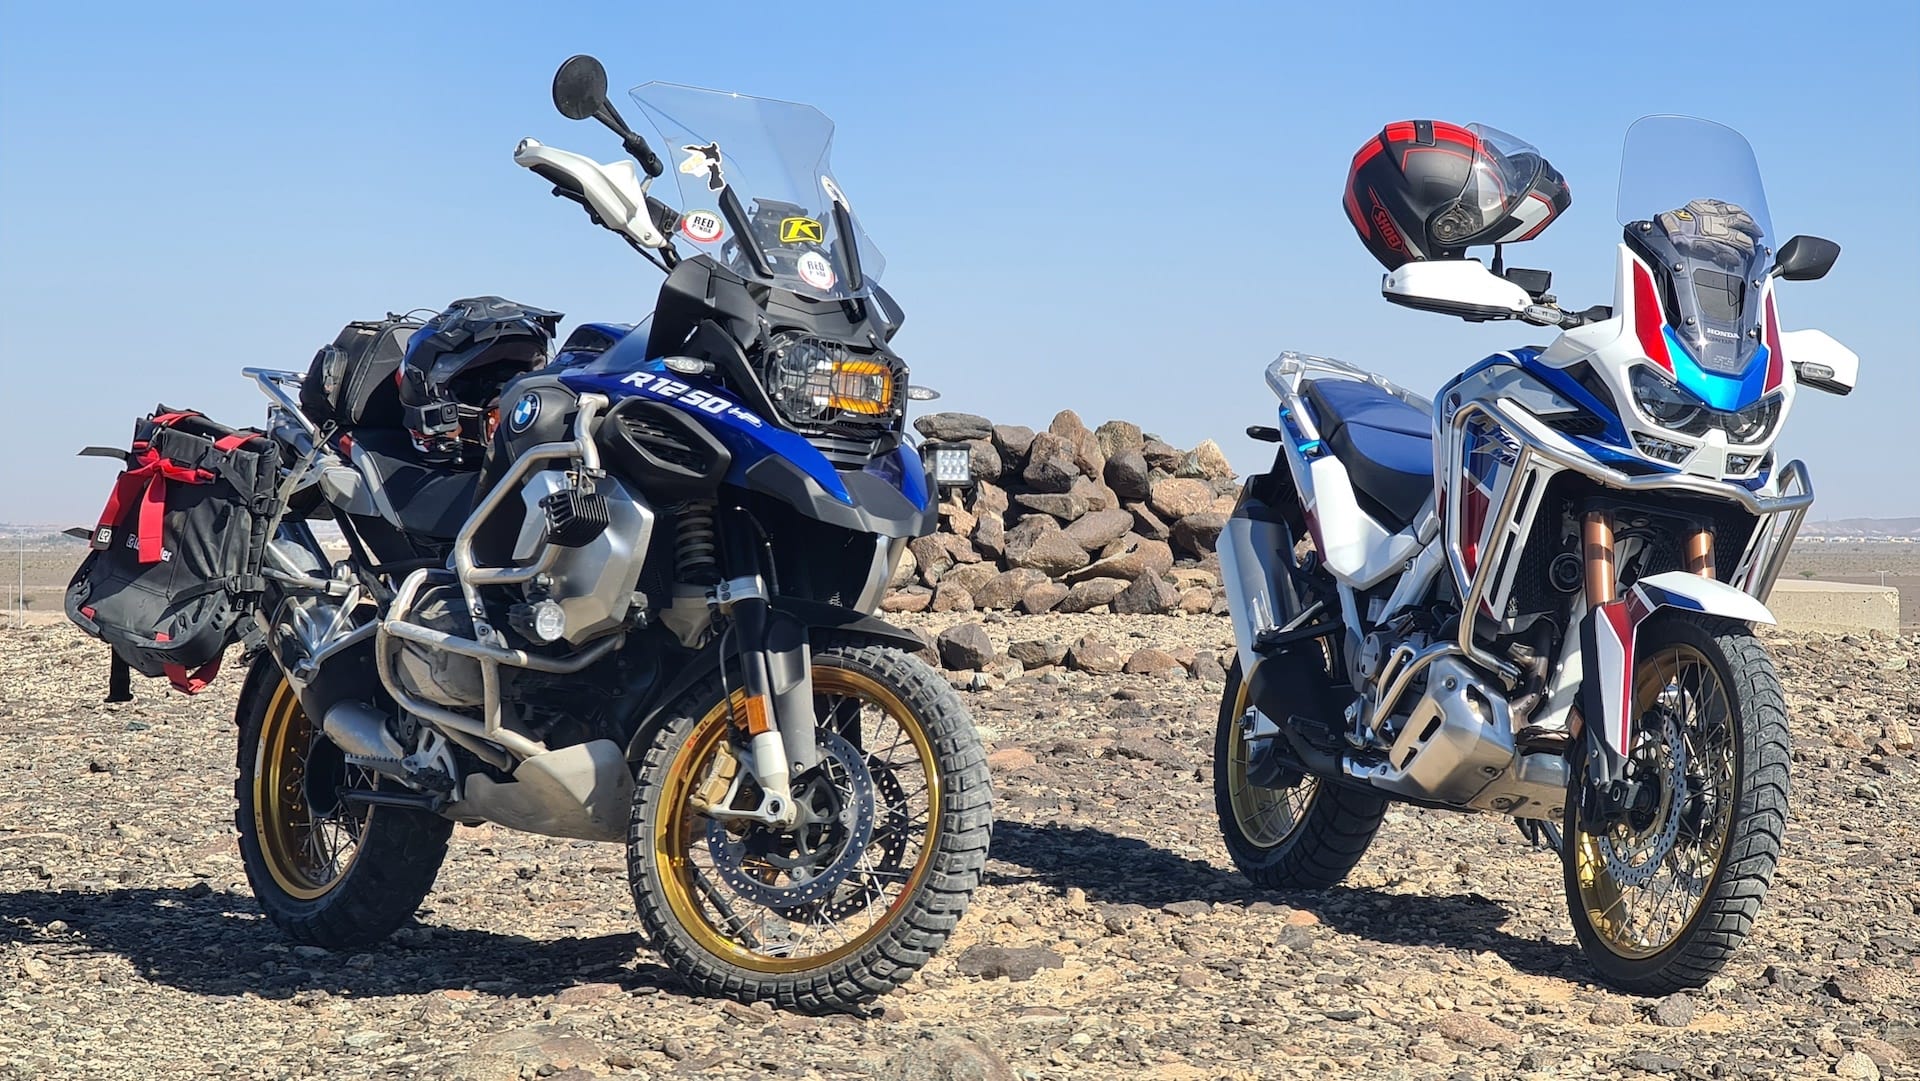 Motorcycle Rental & Tours Company In Dubai - Trails & Dust